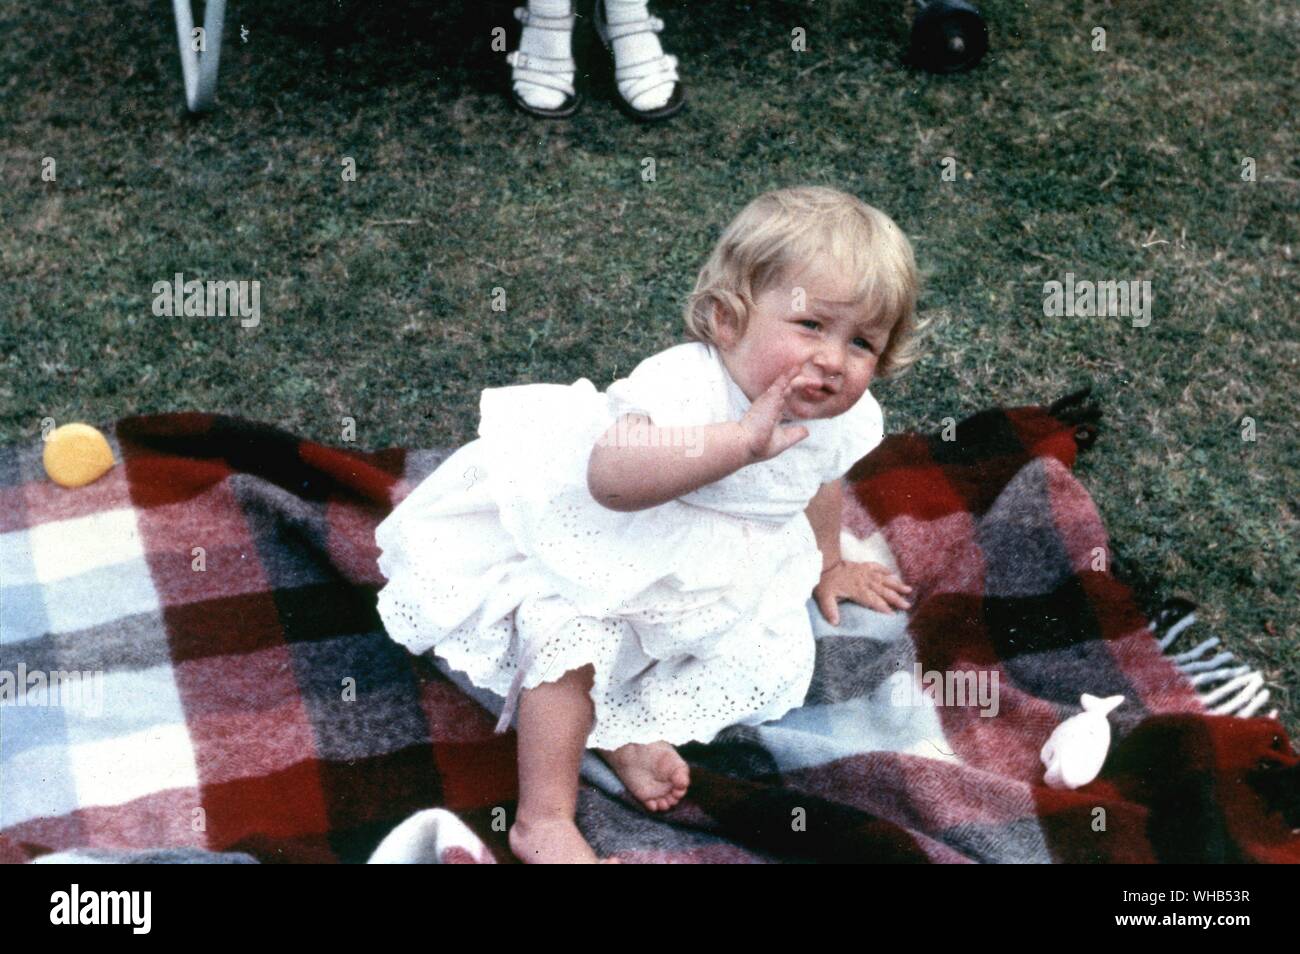 Diana Frances Spencer in as a toddler. Born 1 July 1961 at Sandringham. Became Lady Diana Spencer in 1975. Engaged to Prince Charles 24 February 1981. Married to Prince Charles 29 July 1981. Separated from Charles 9 December 1992. Divorced 28 August 1996. Died 31 August 1997 in Paris. Stock Photo